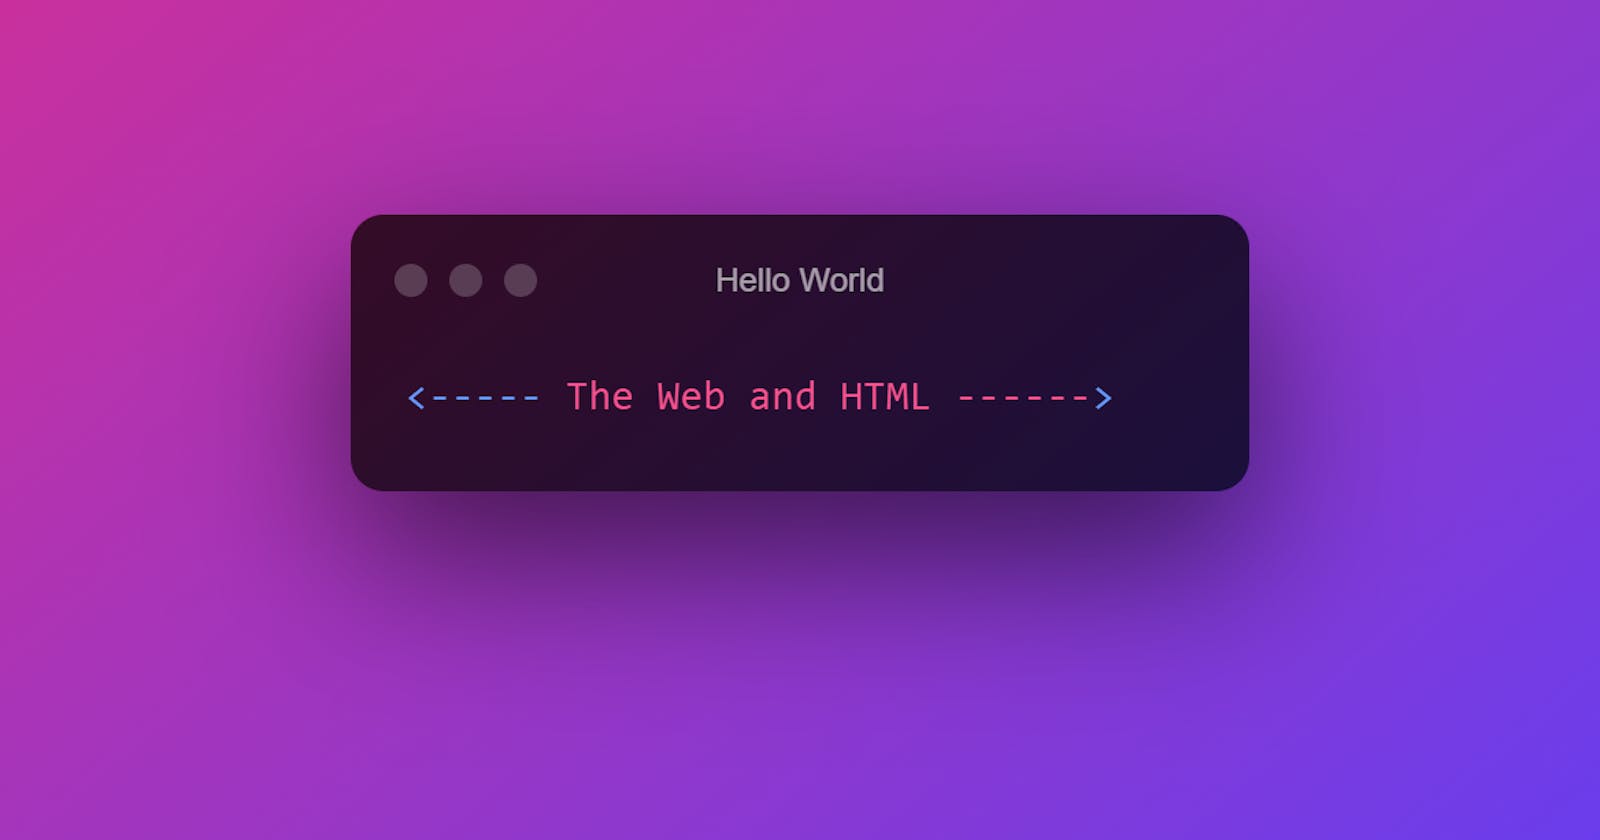 Introduction to Web and HTML